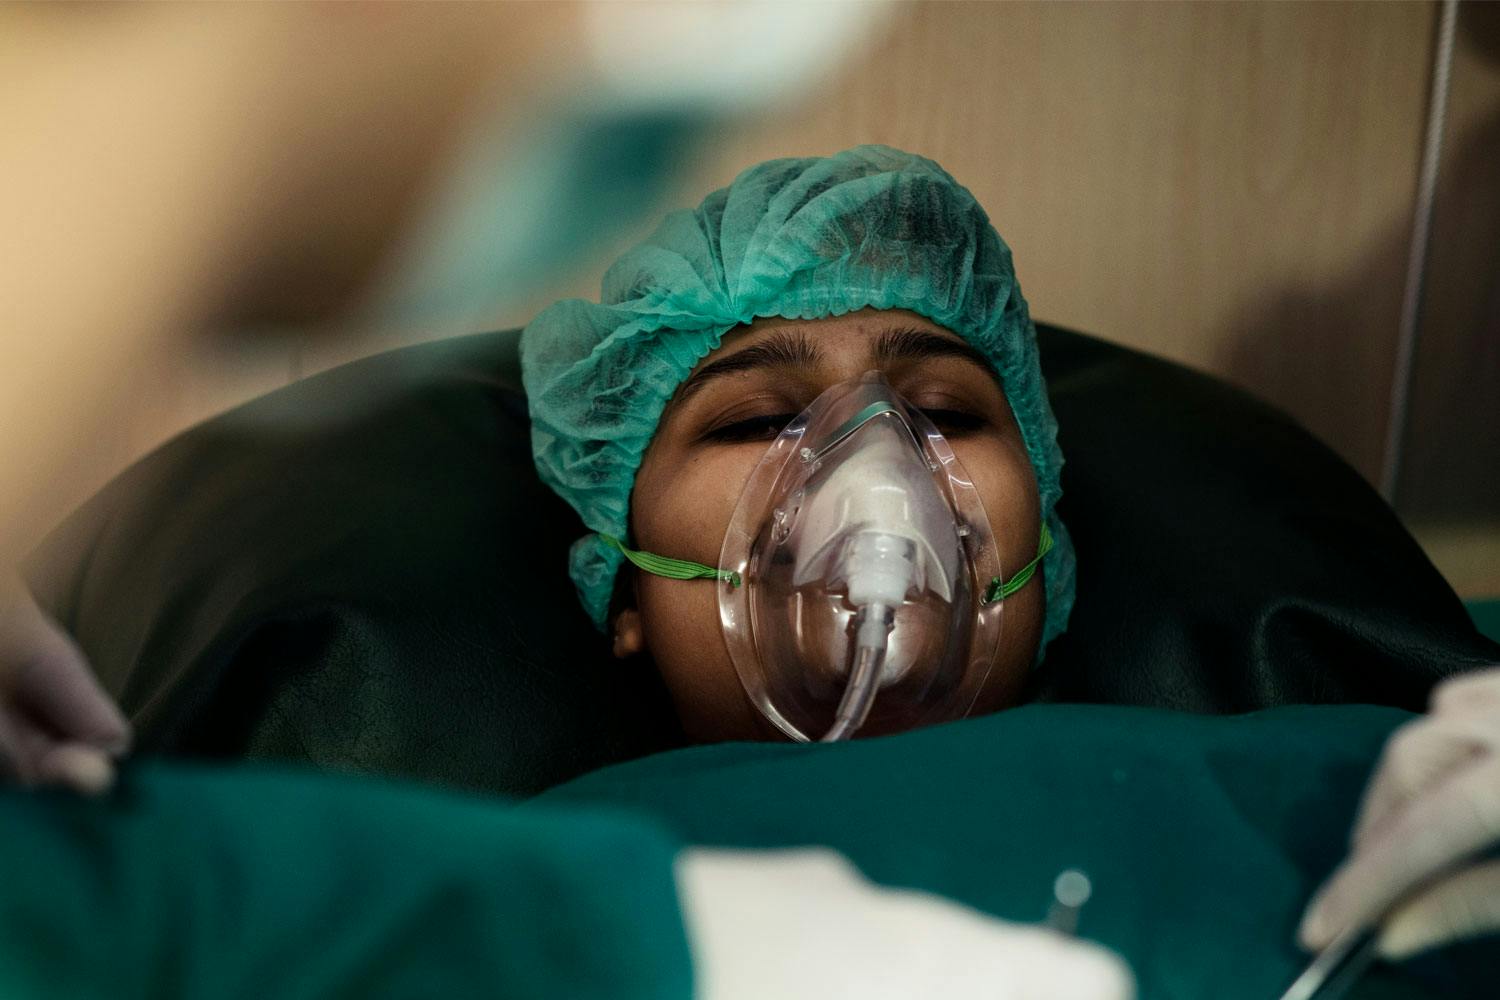 A person lying on a stretcher wearing a green hair net and an oxygen mask, eyes closed.